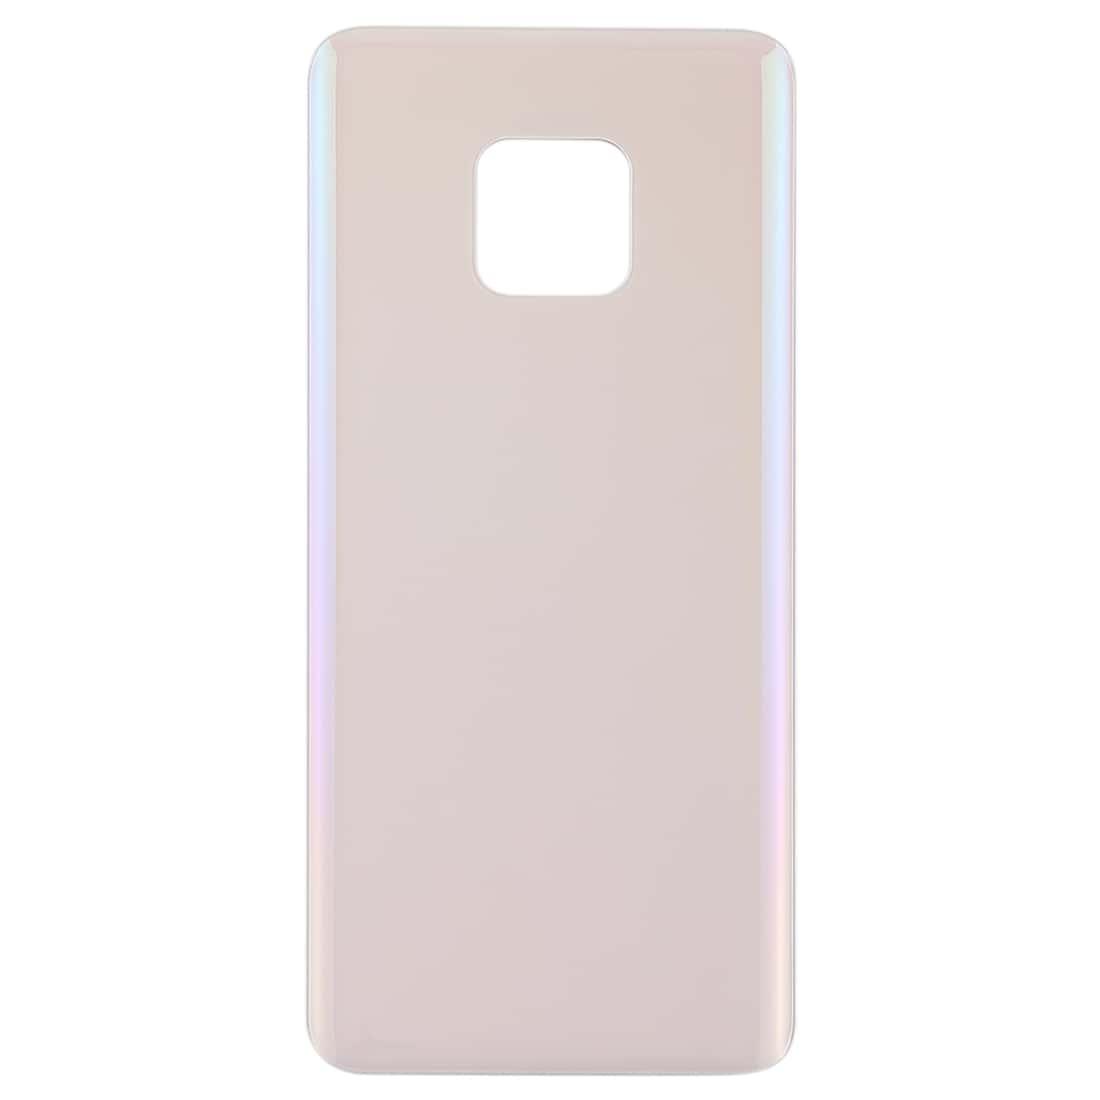 Back Glass Panel for  Huawei Mate 20 Pro Pink